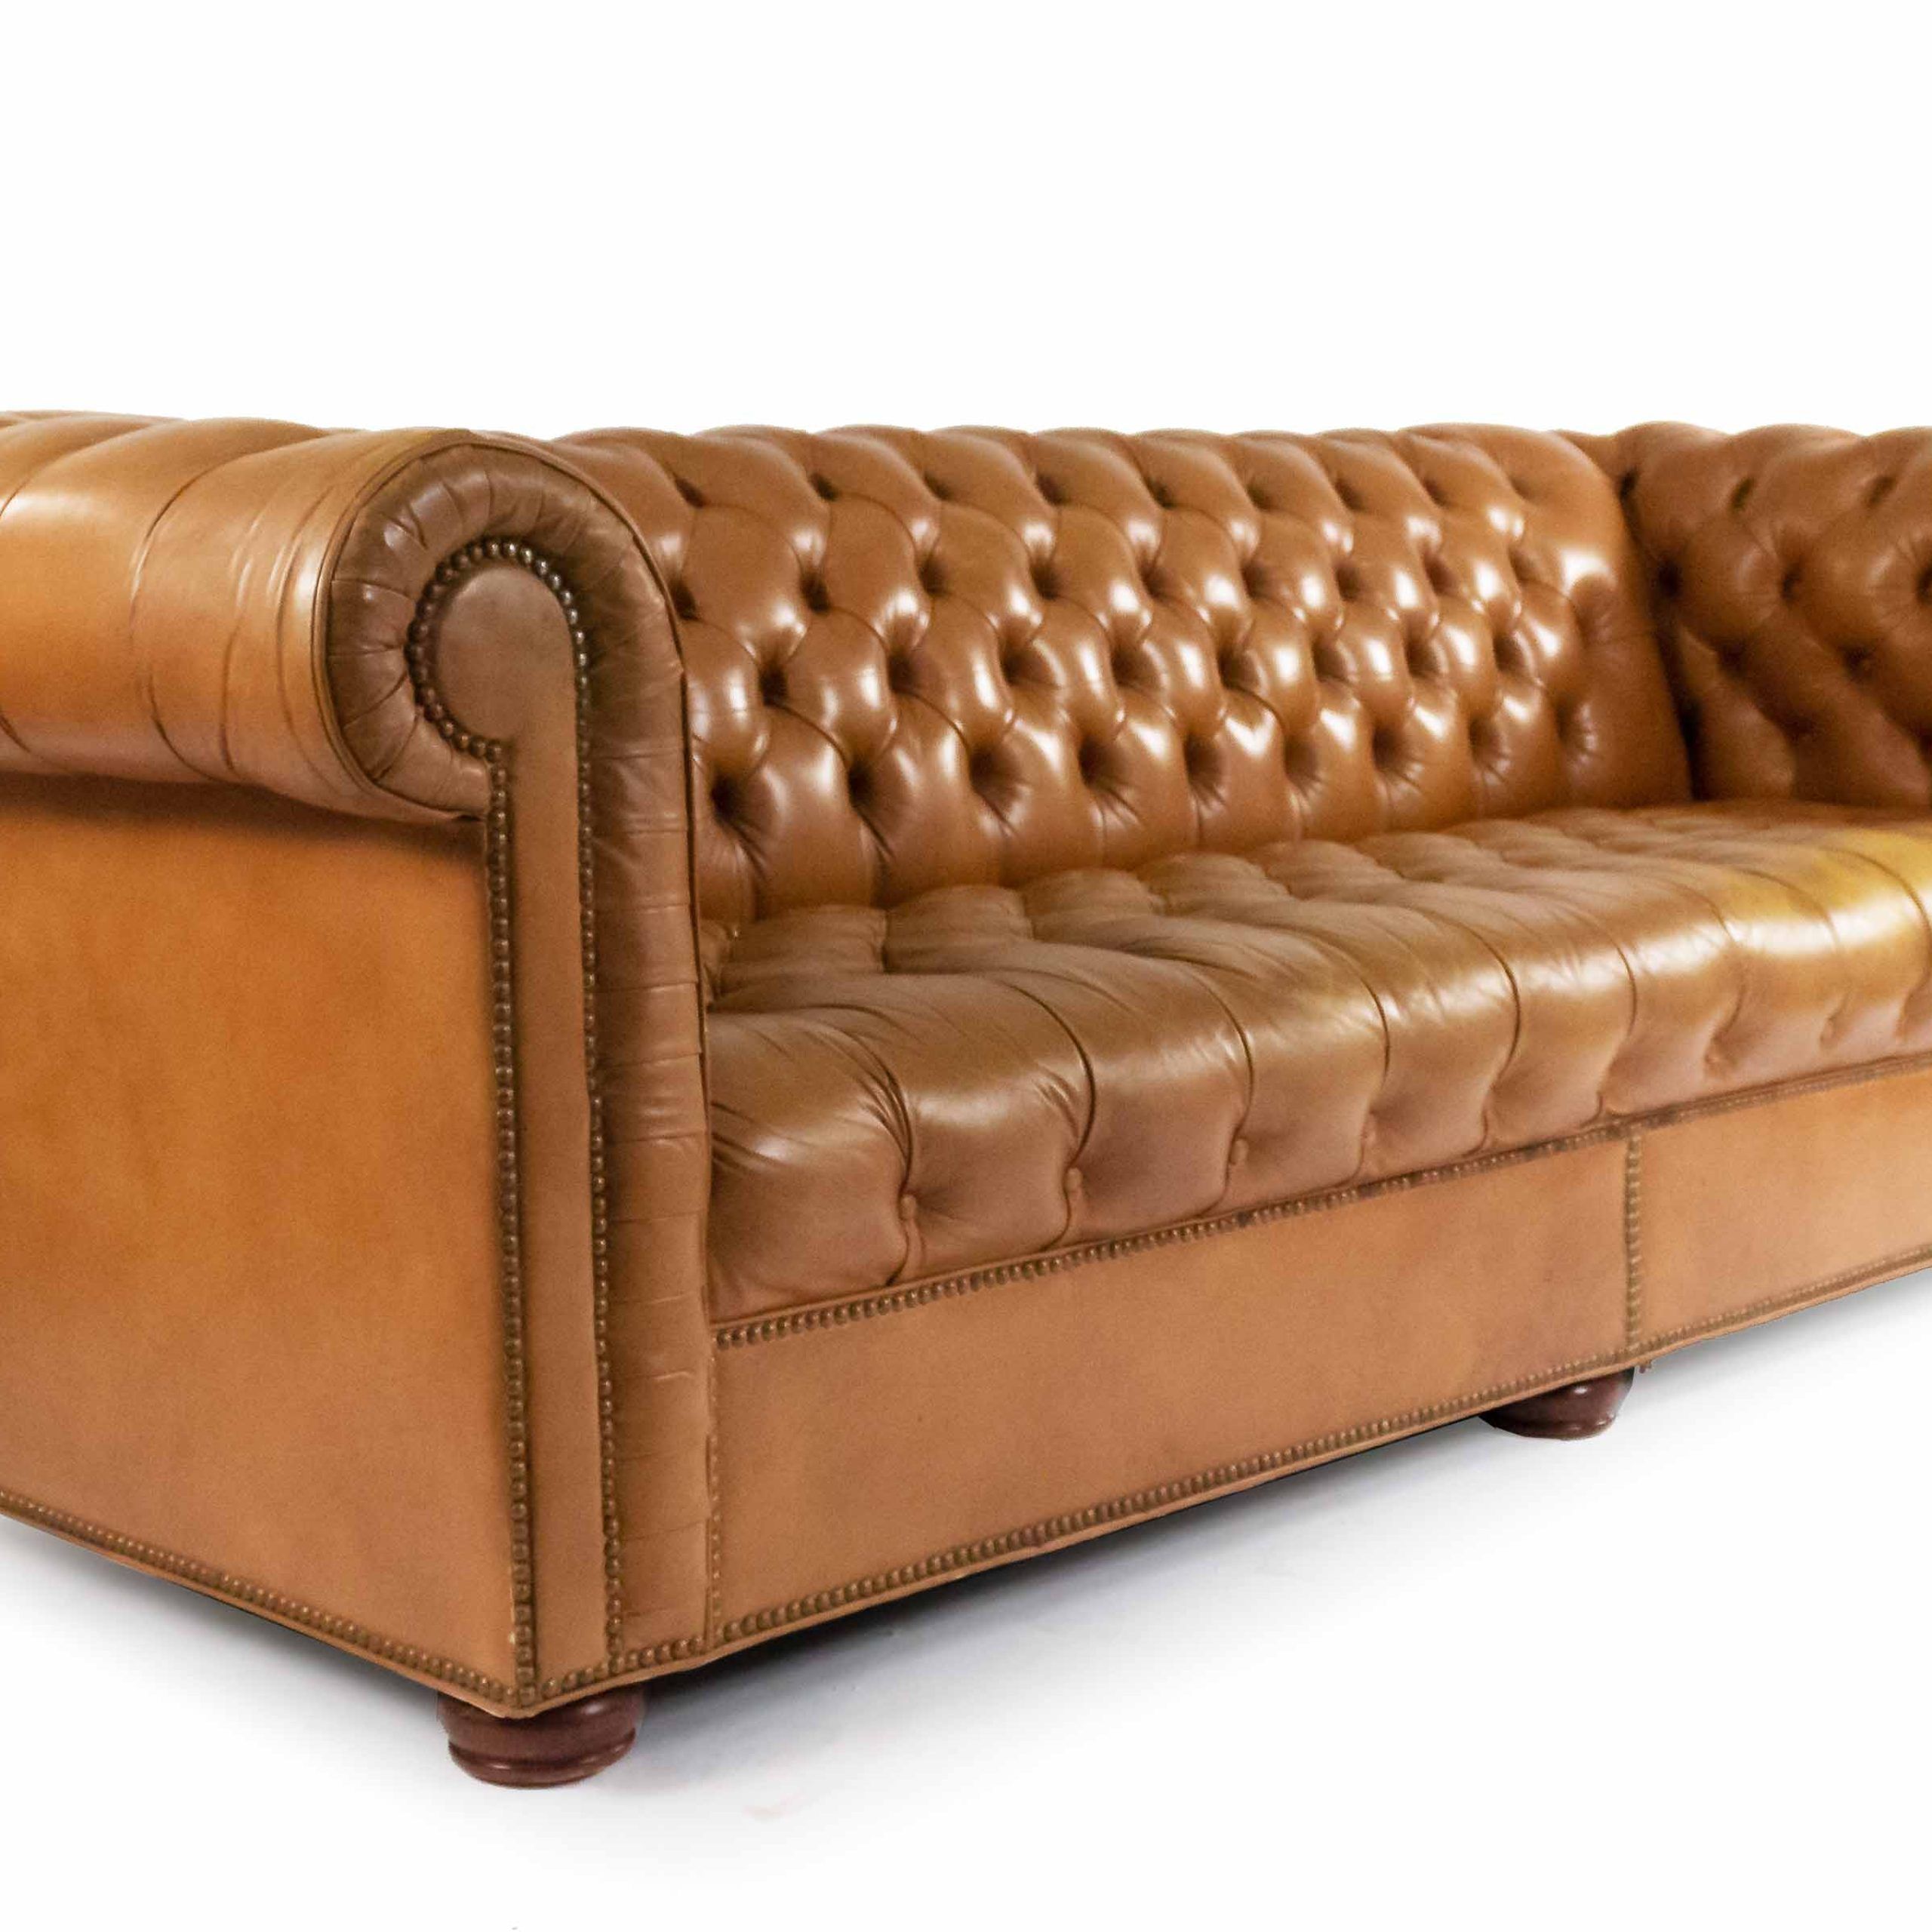 Tobacco Brown Leather Chesterfield Sofa Intended For Chesterfield Sofas (View 6 of 21)